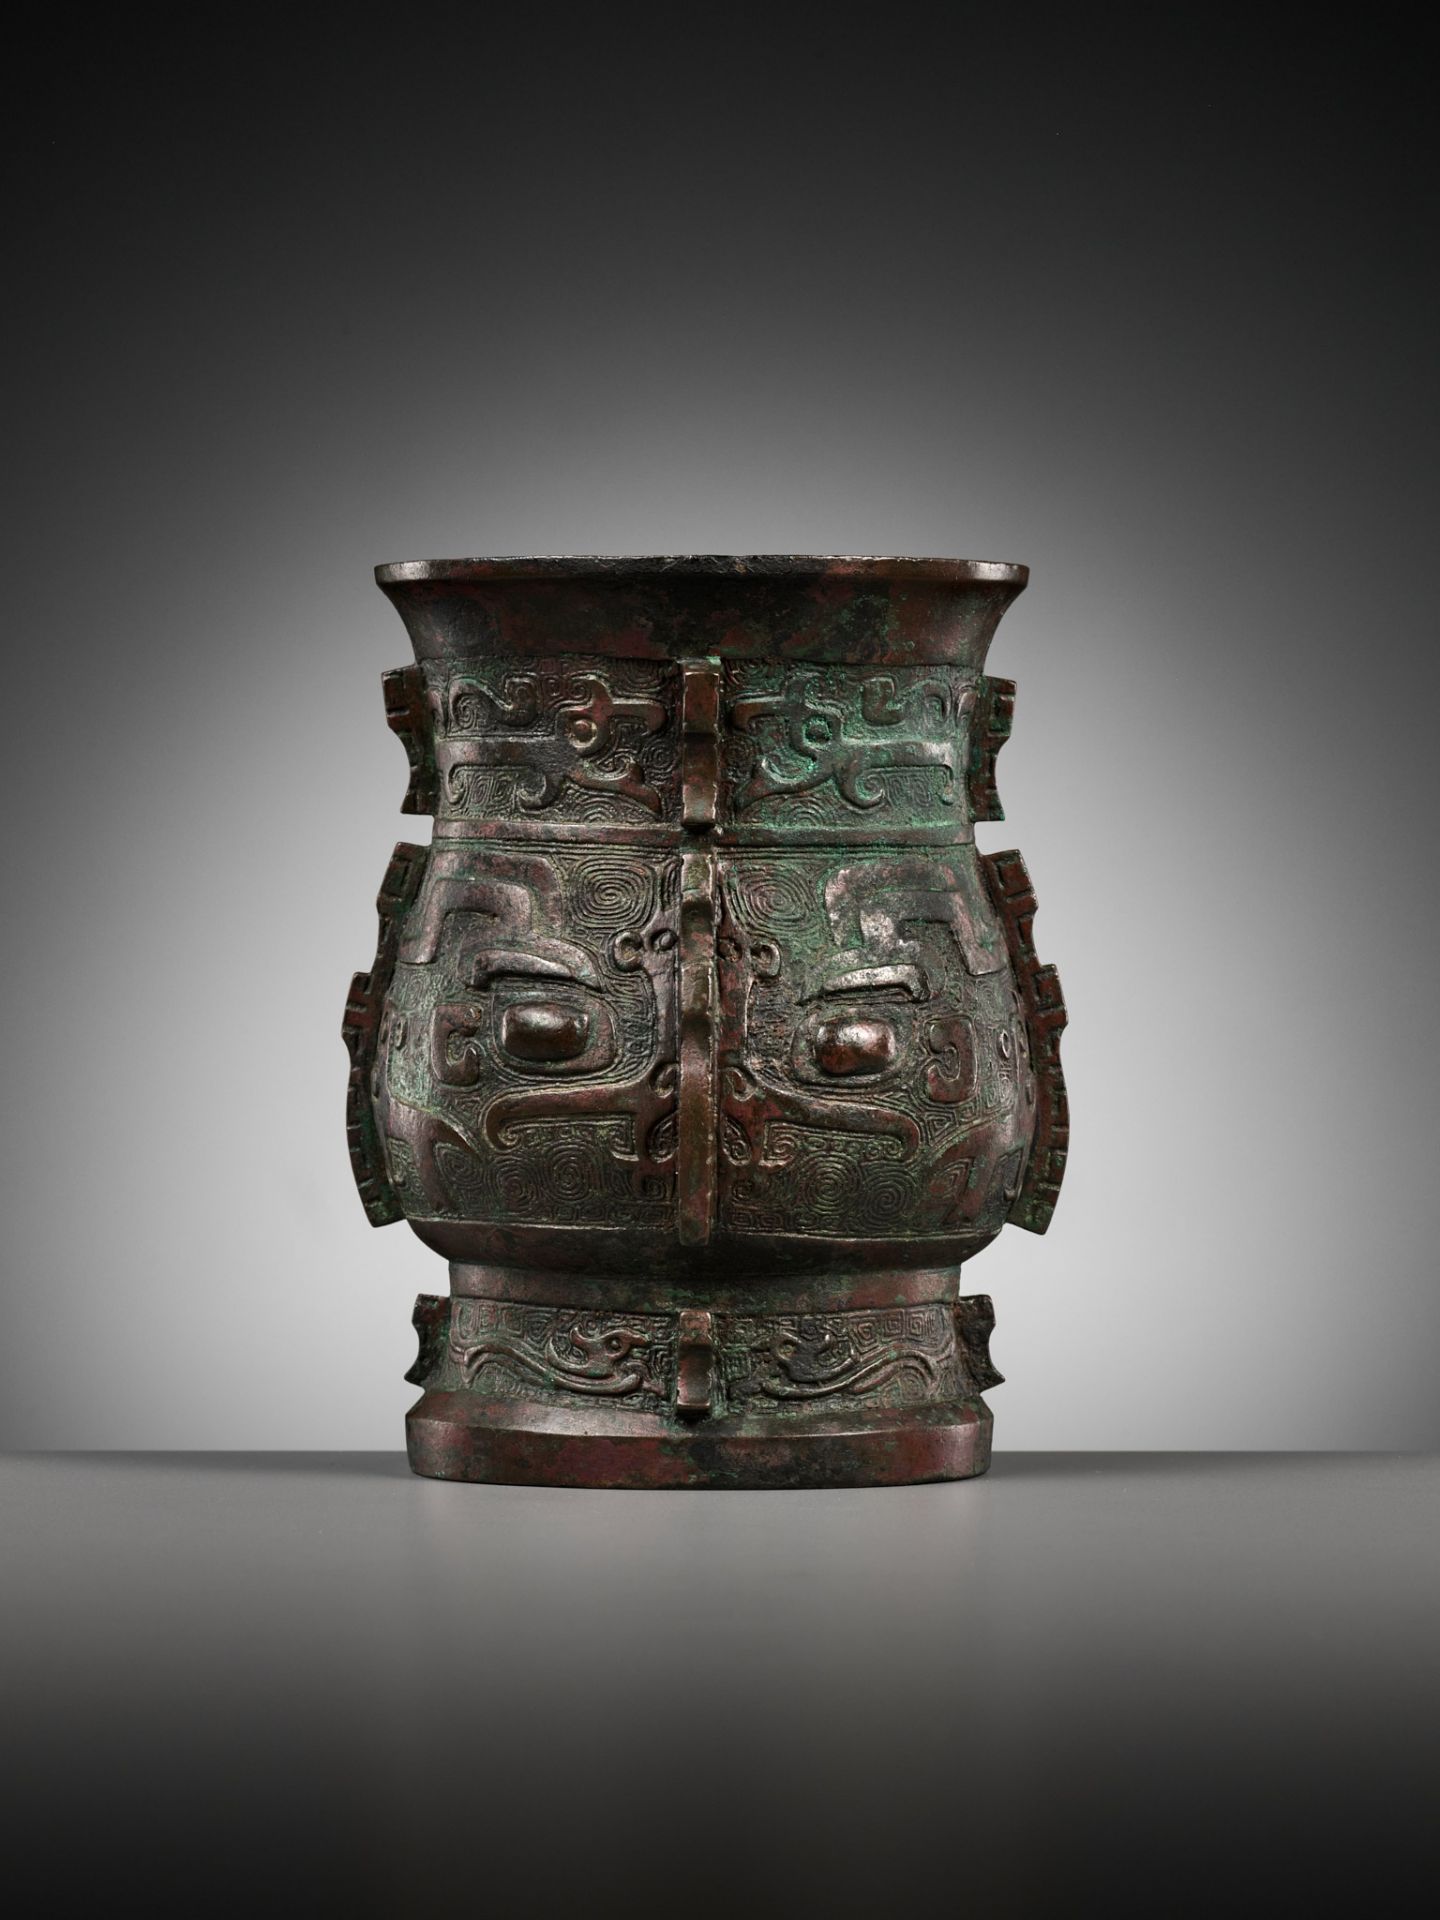 A RARE BRONZE RITUAL WINE VESSEL, ZHI, SHANG DYNASTY, CHINA, 13TH-12TH CENTURY BC - Image 11 of 25